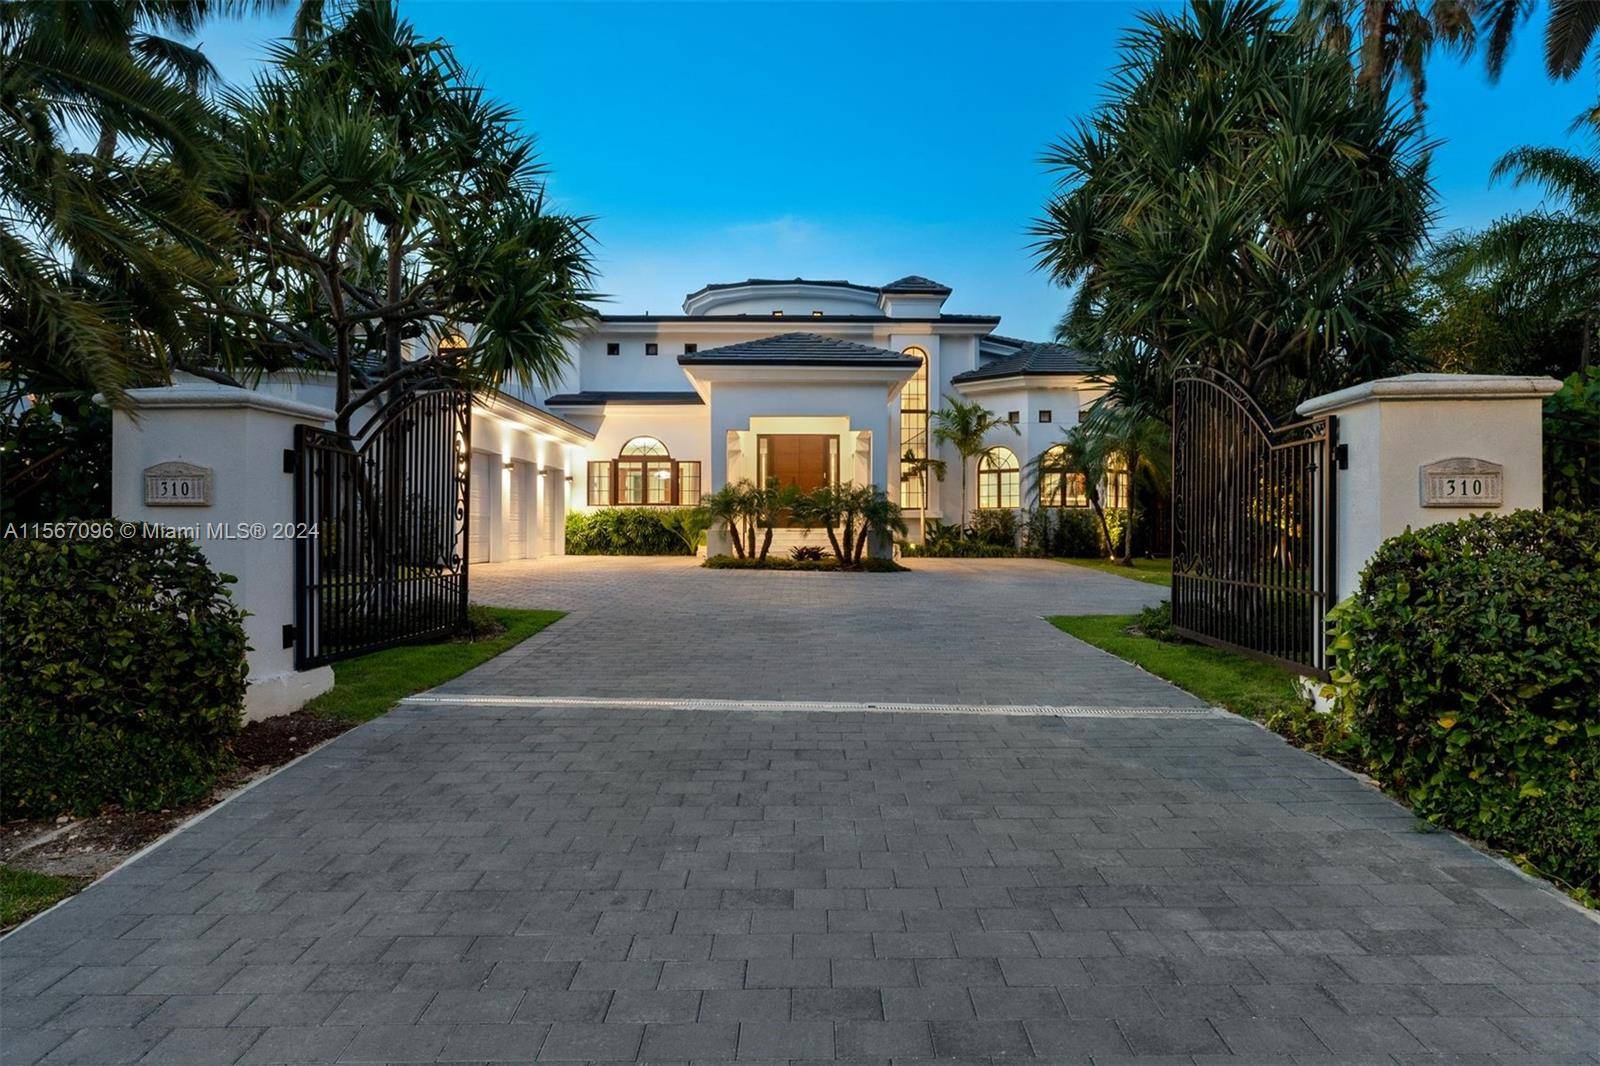 Nestled within the prestigious guard gated community of Golden Beach, this exquisite recently renovated waterfront home boasts 6 BR 6 1 BA, 100 feet on the water on an expansive ...